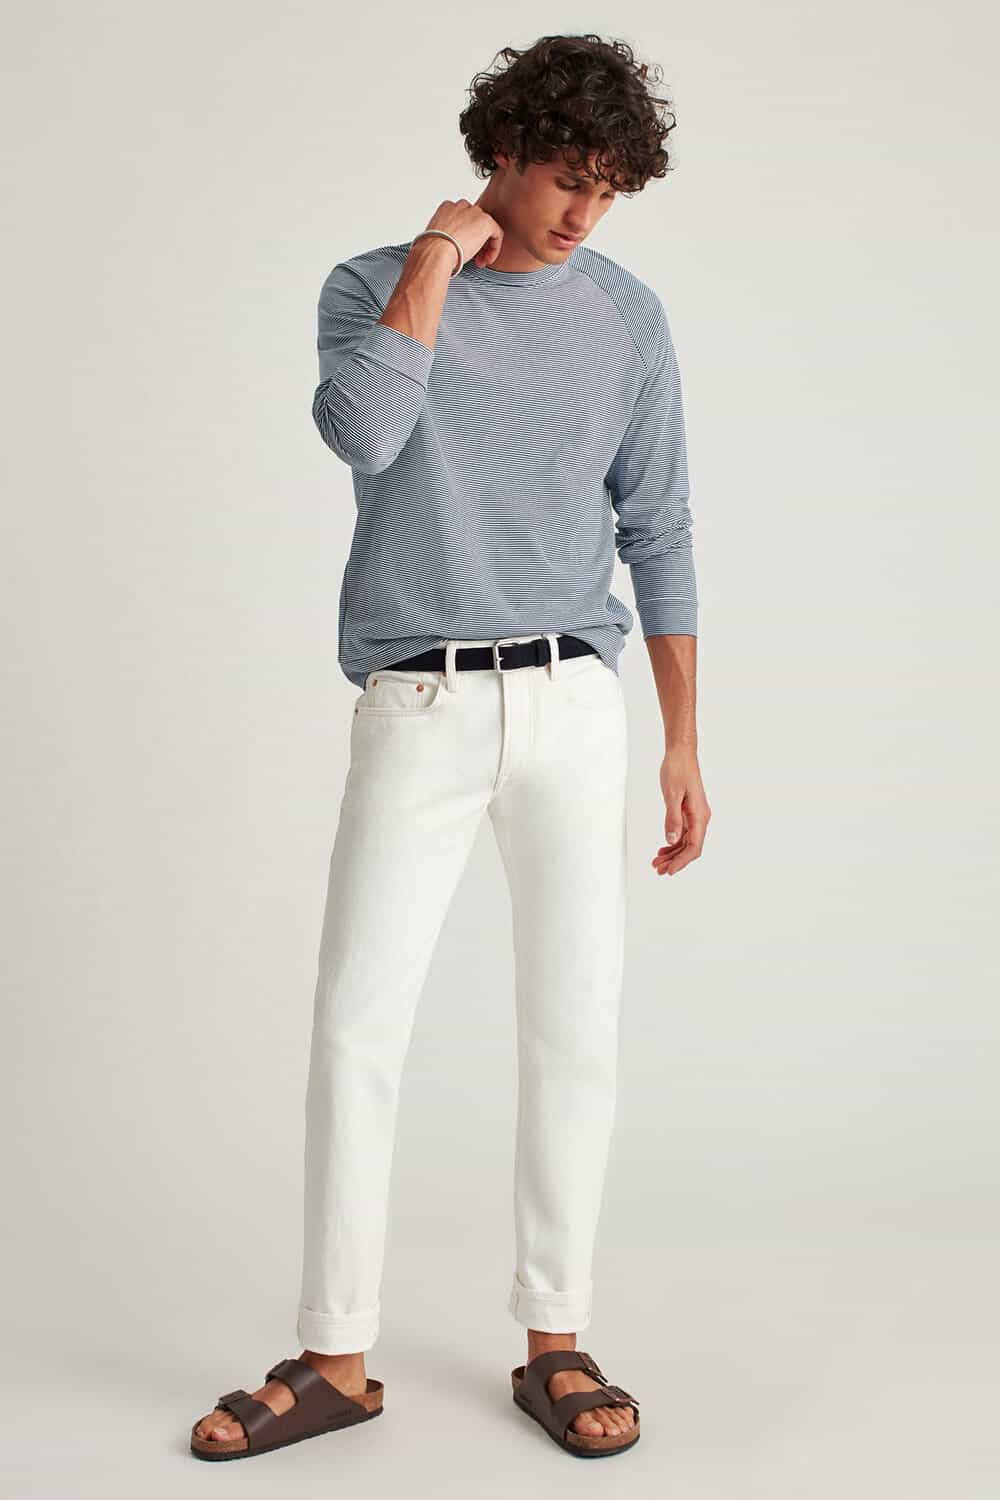 White Jeans Outfit Inspiration For Men: 16 Cool Looks For 2024